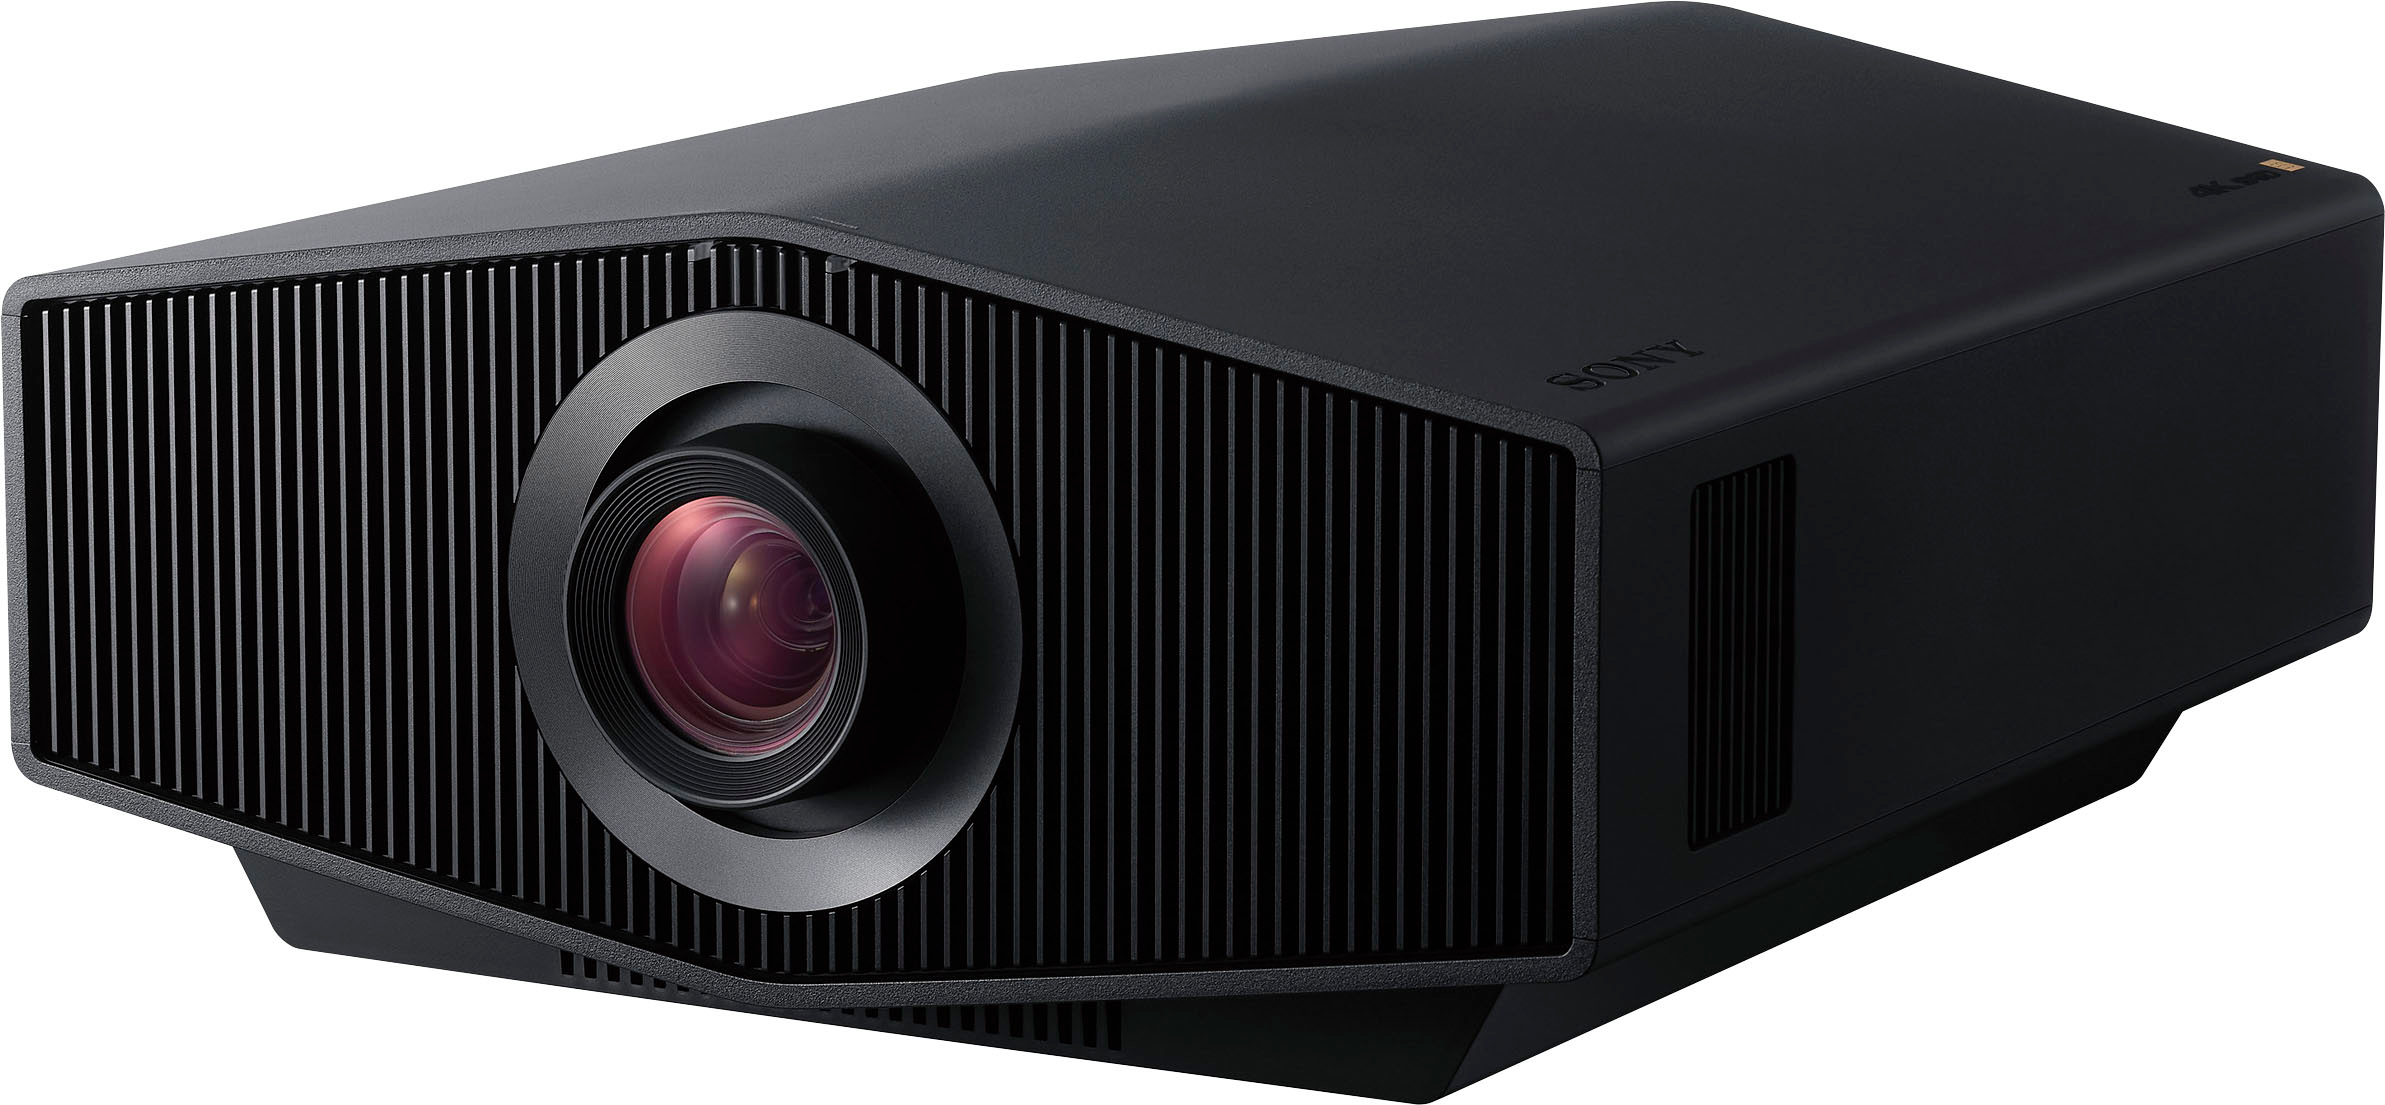 Angle View: Sony - VPLXW7000ES 4K HDR Laser Home Theater Projector with Native 4K SXRD Panel - Black